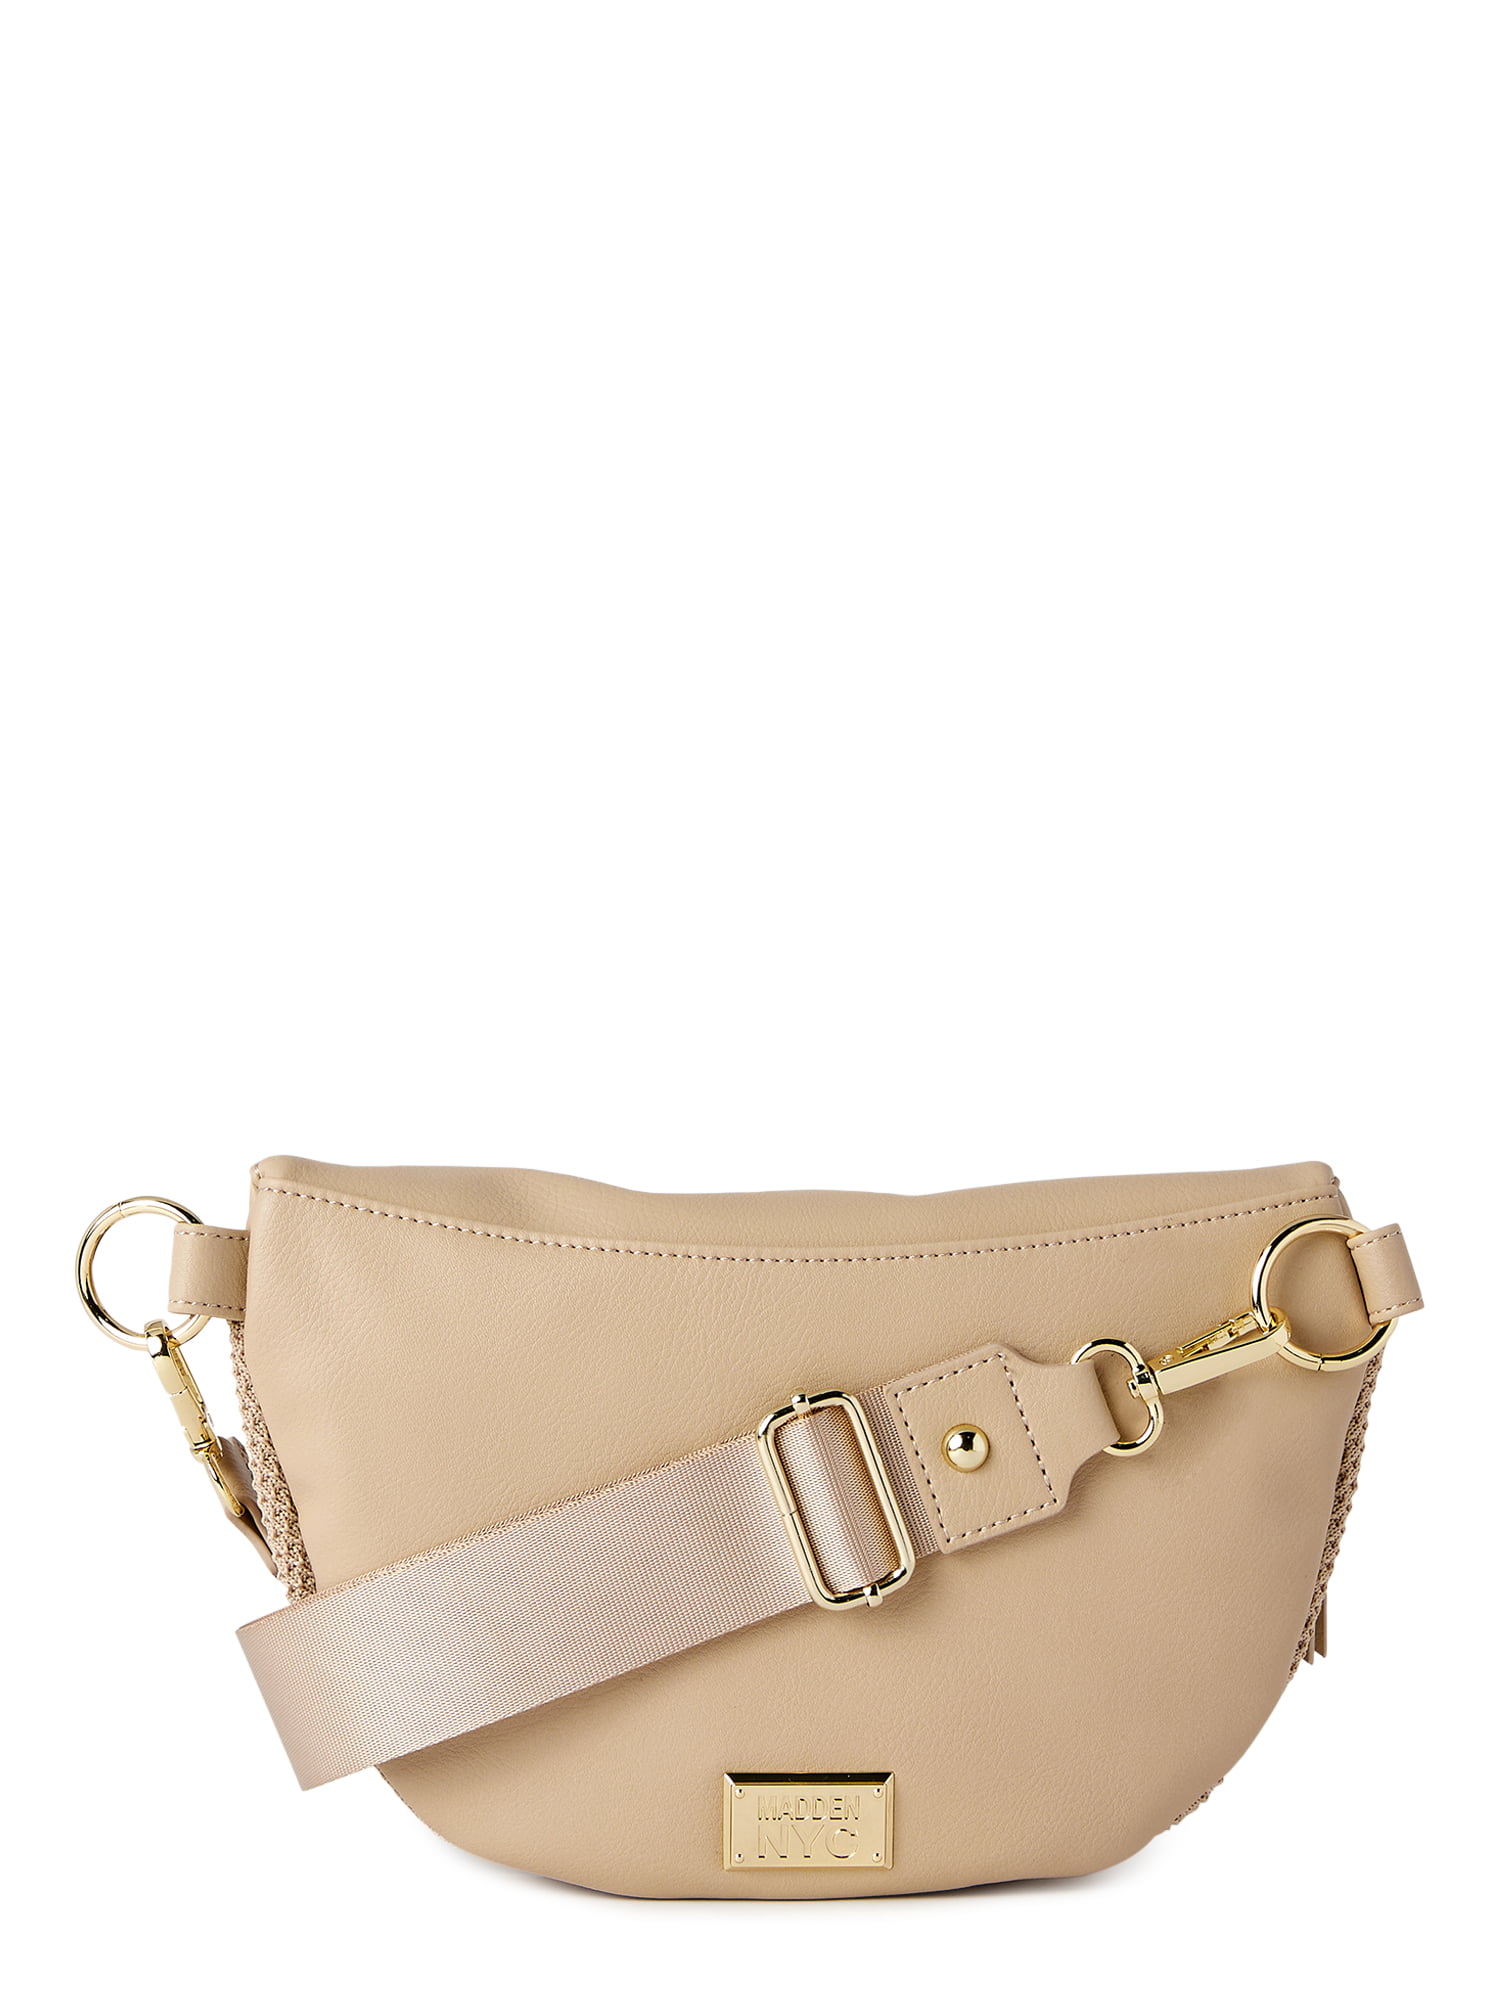 DANCOUR Beige Fanny Pack Crossbody Bags for Women - Beige Belt Bag for Women Crossbody - Everywhere Belt Bag for Women Fashion Waist Packs Mini Bag